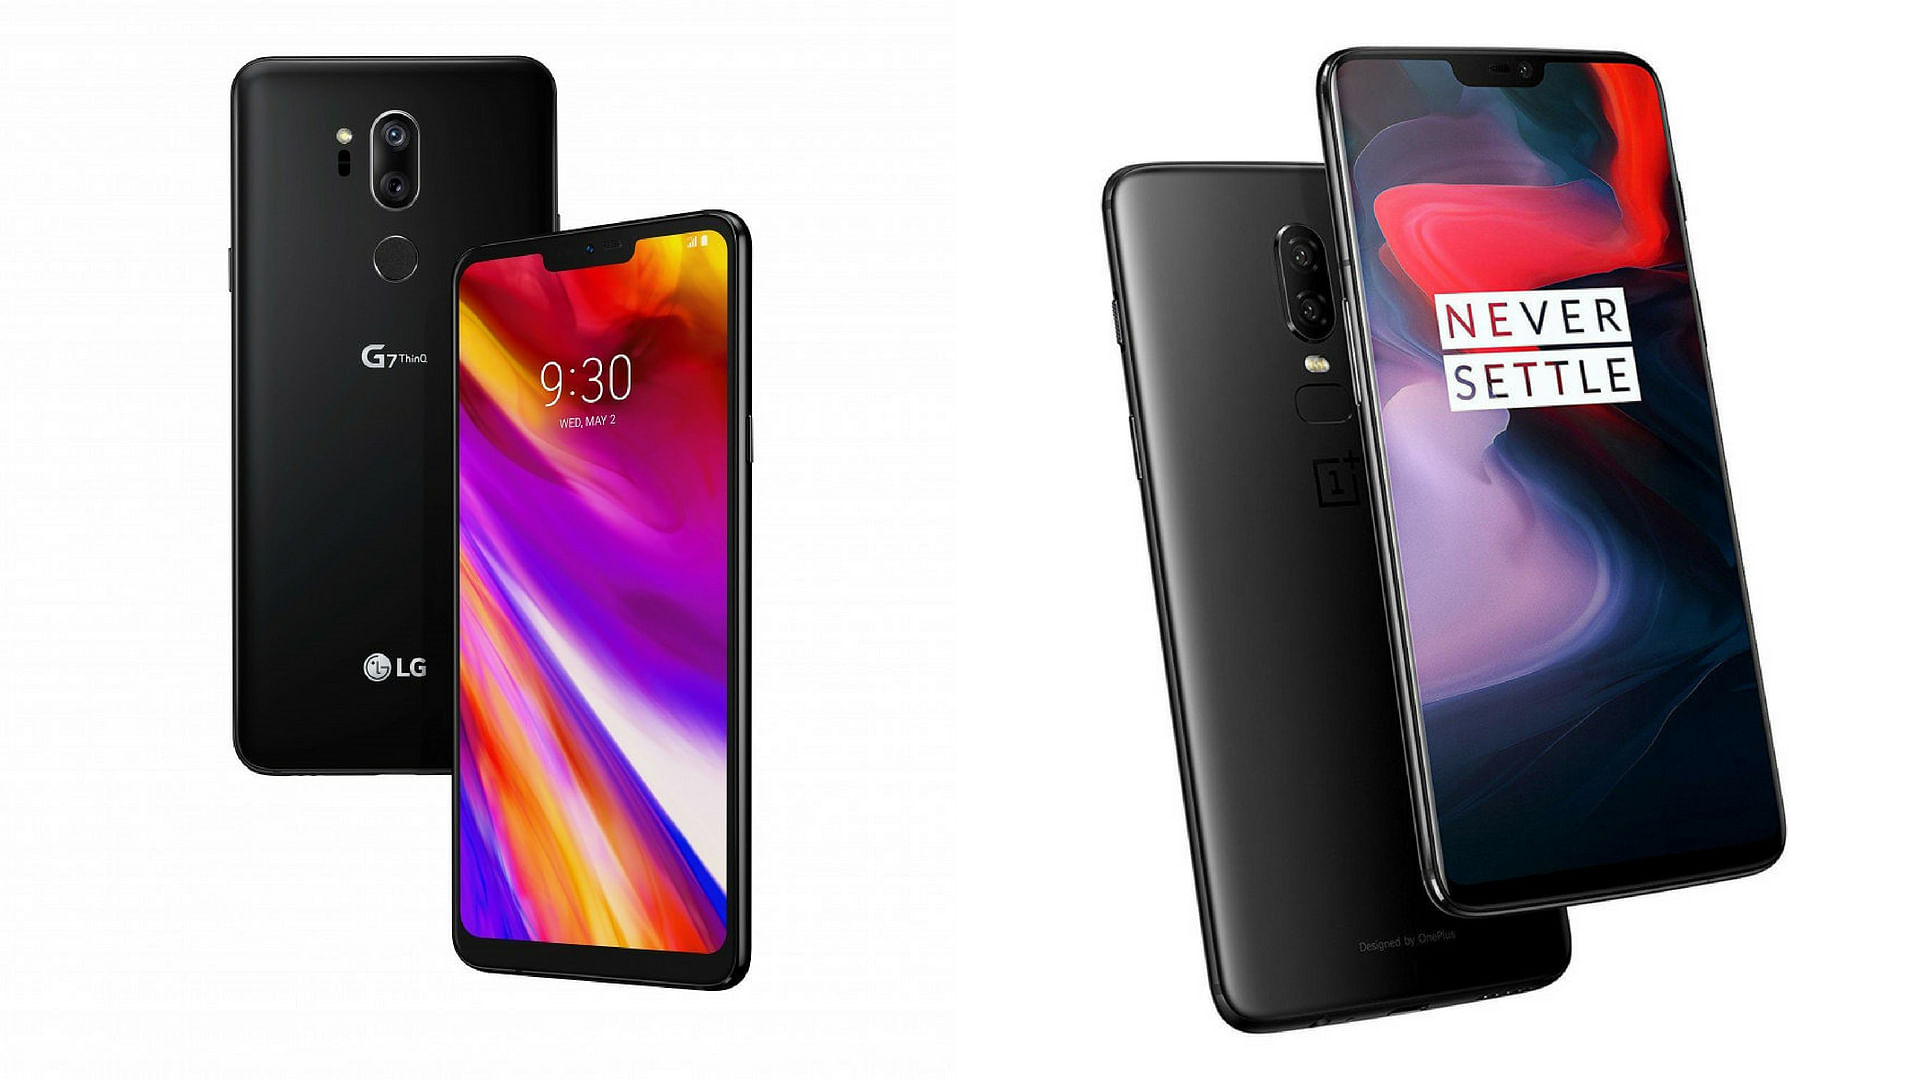 LG G7+ ThinQ (left) and OnePlus 6 (right)